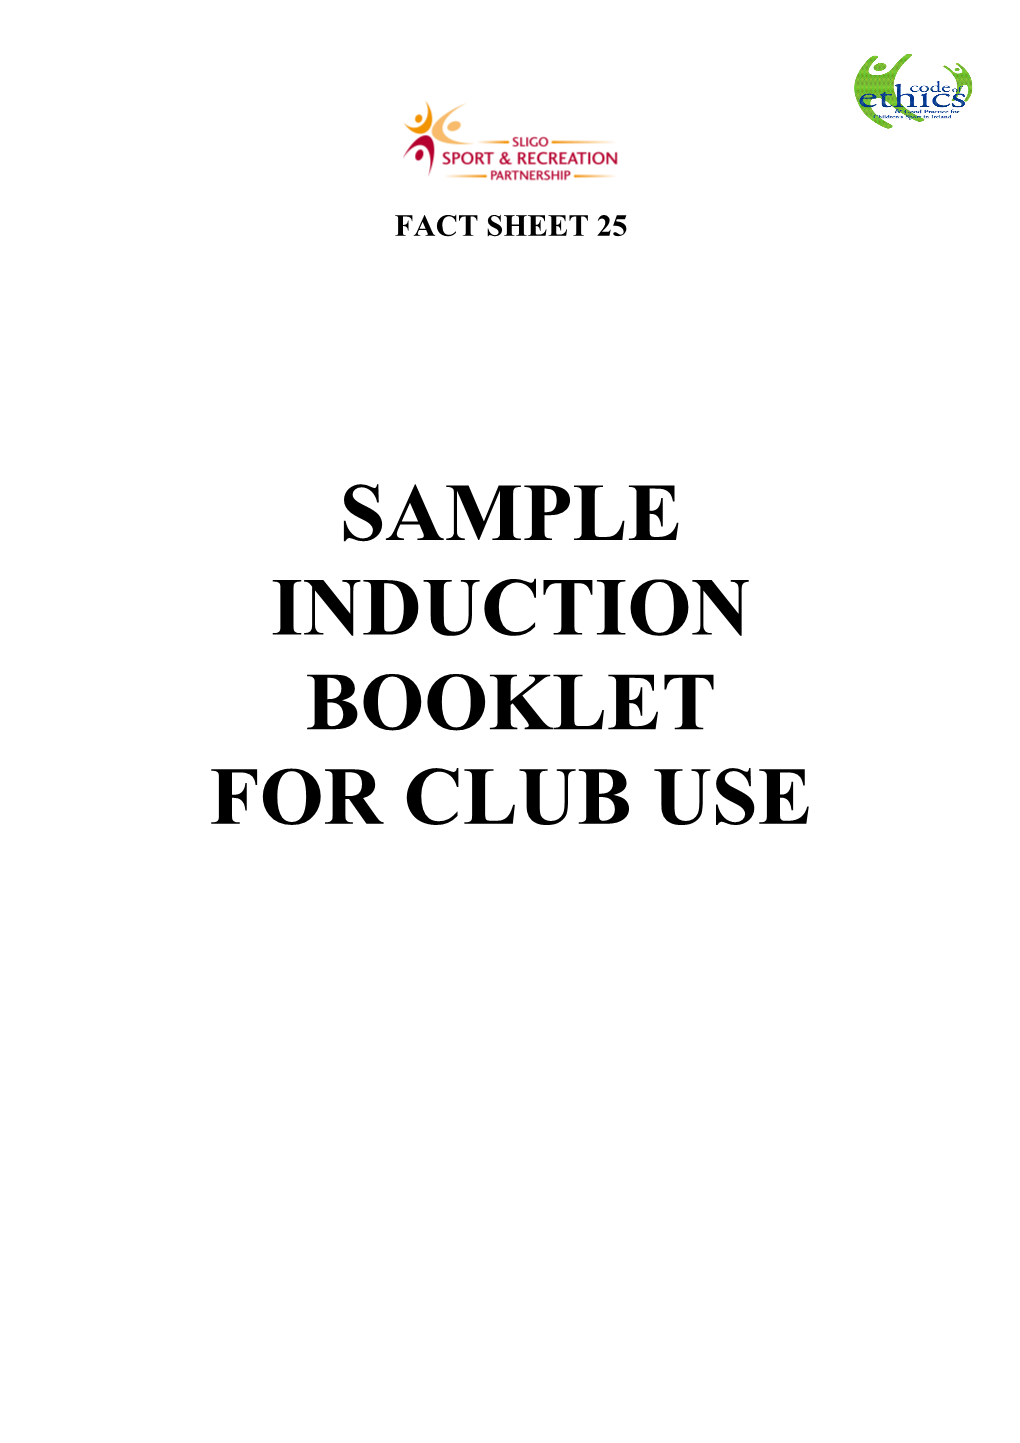 Induction Booklet